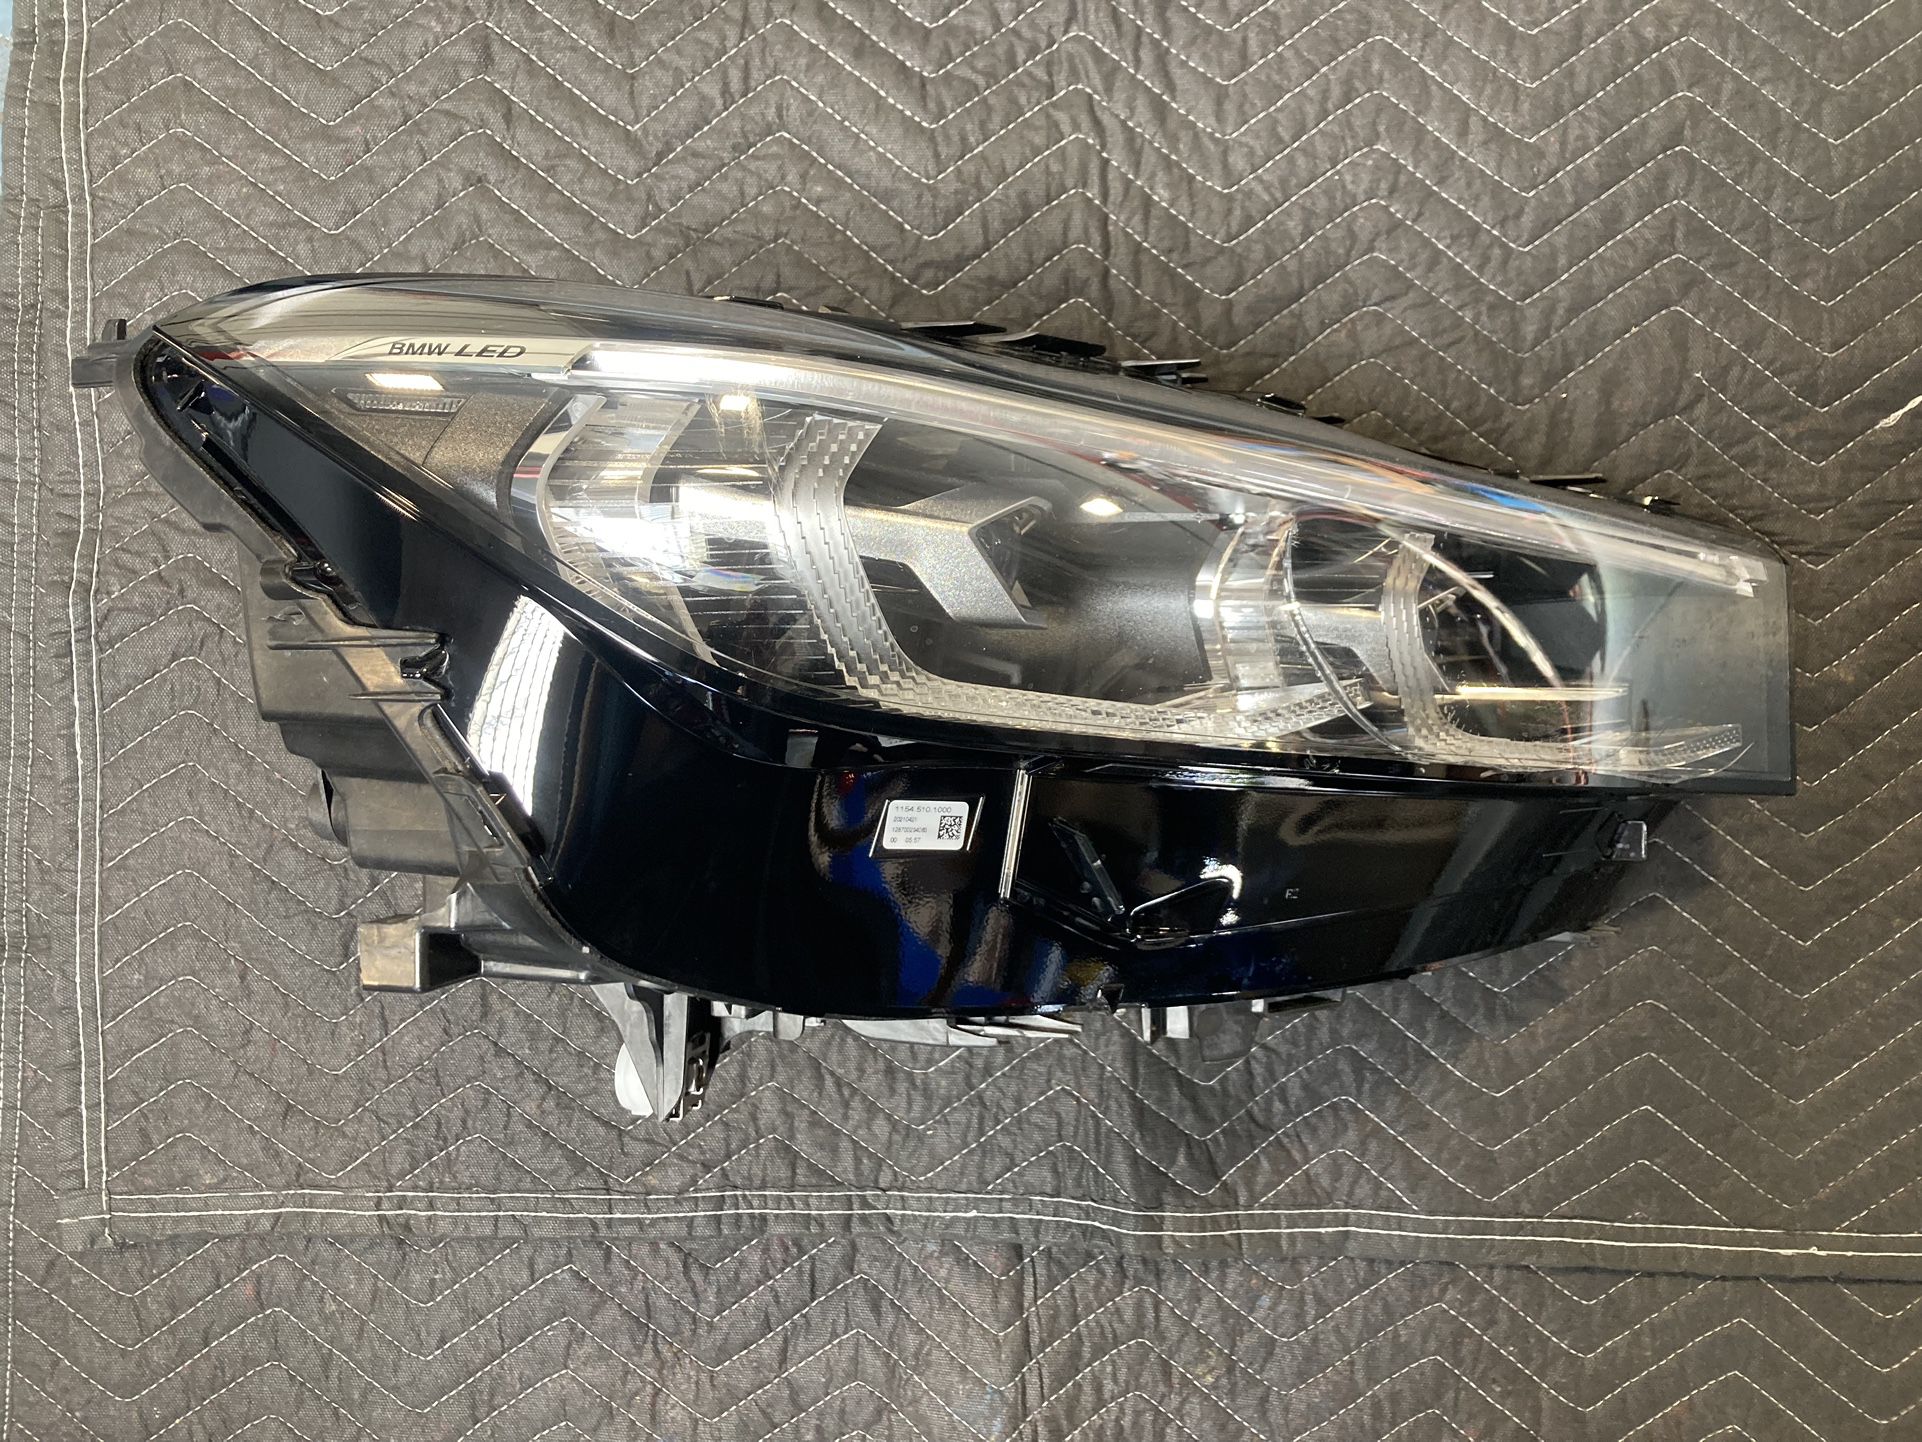 BMW G11 Headlight With Cracked Lens